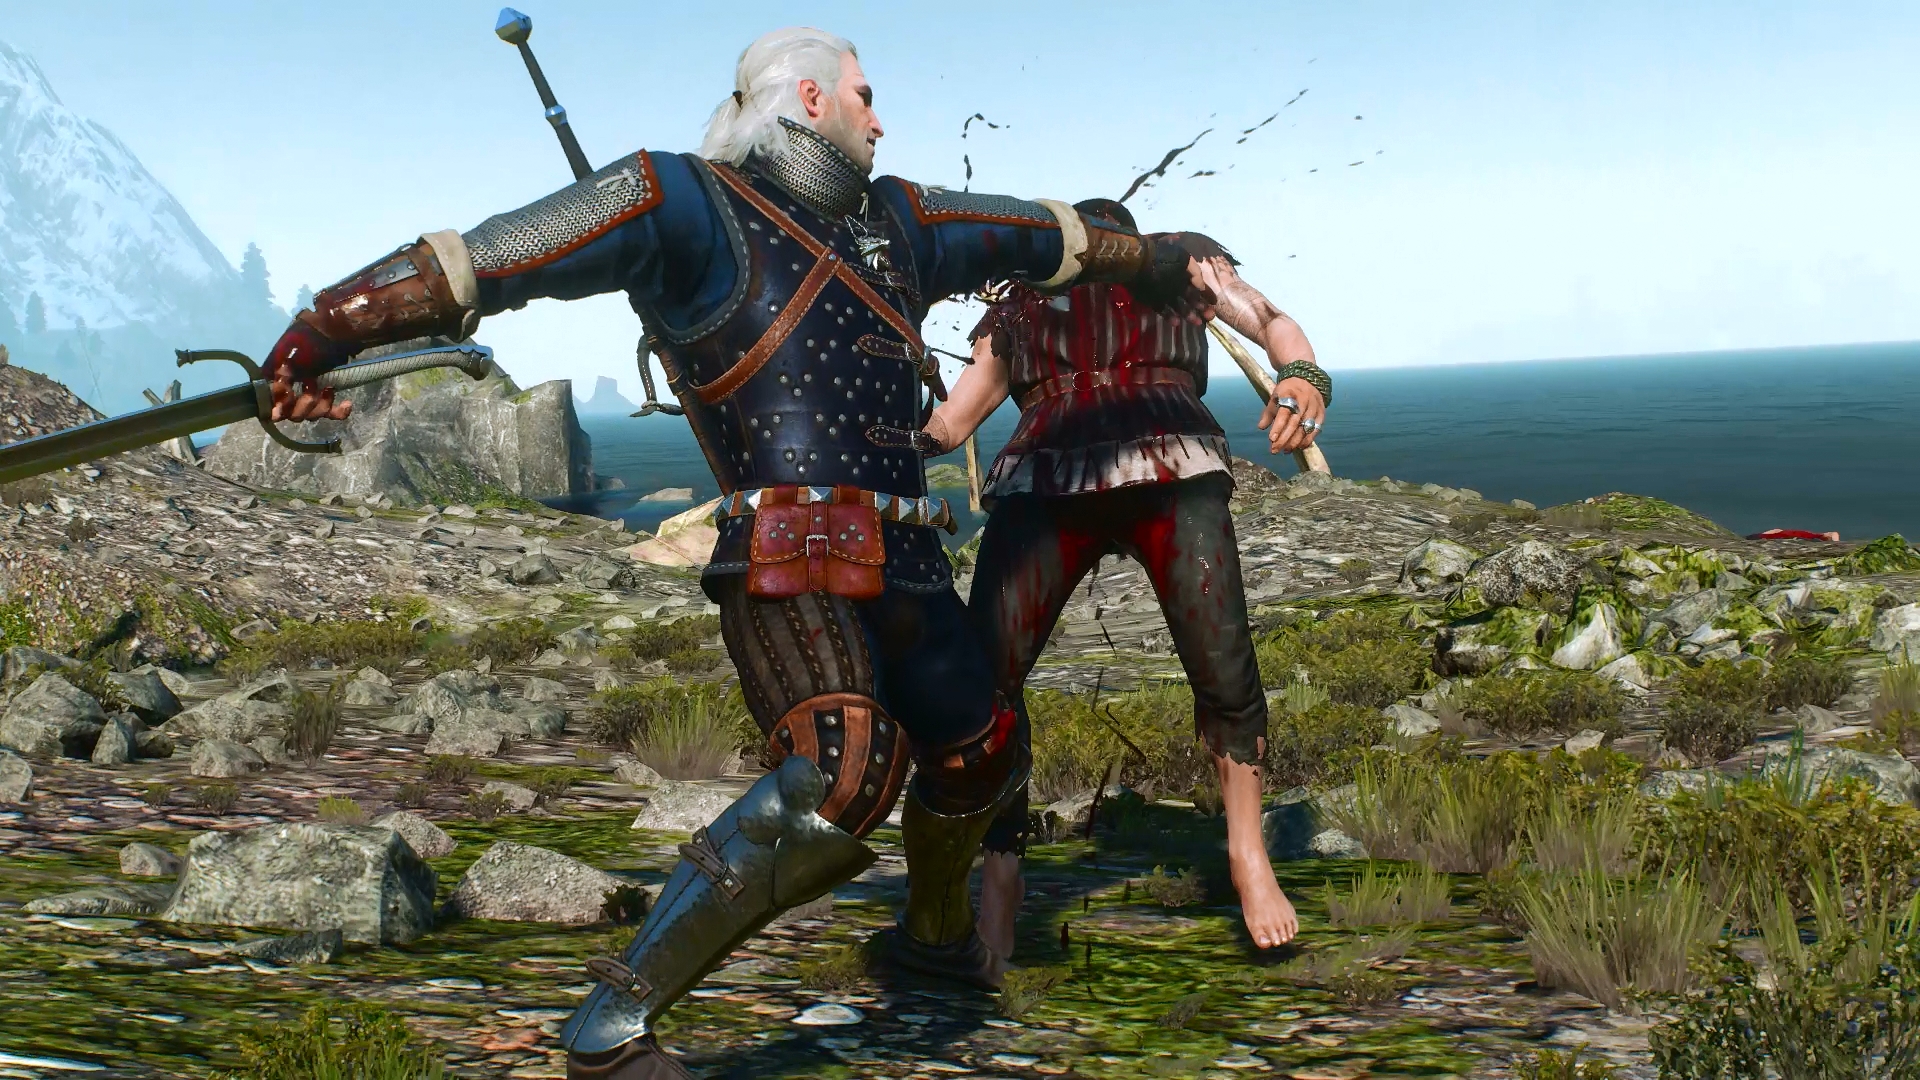 Best Witcher 3 Armor Mods For More Protection – FandomSpot